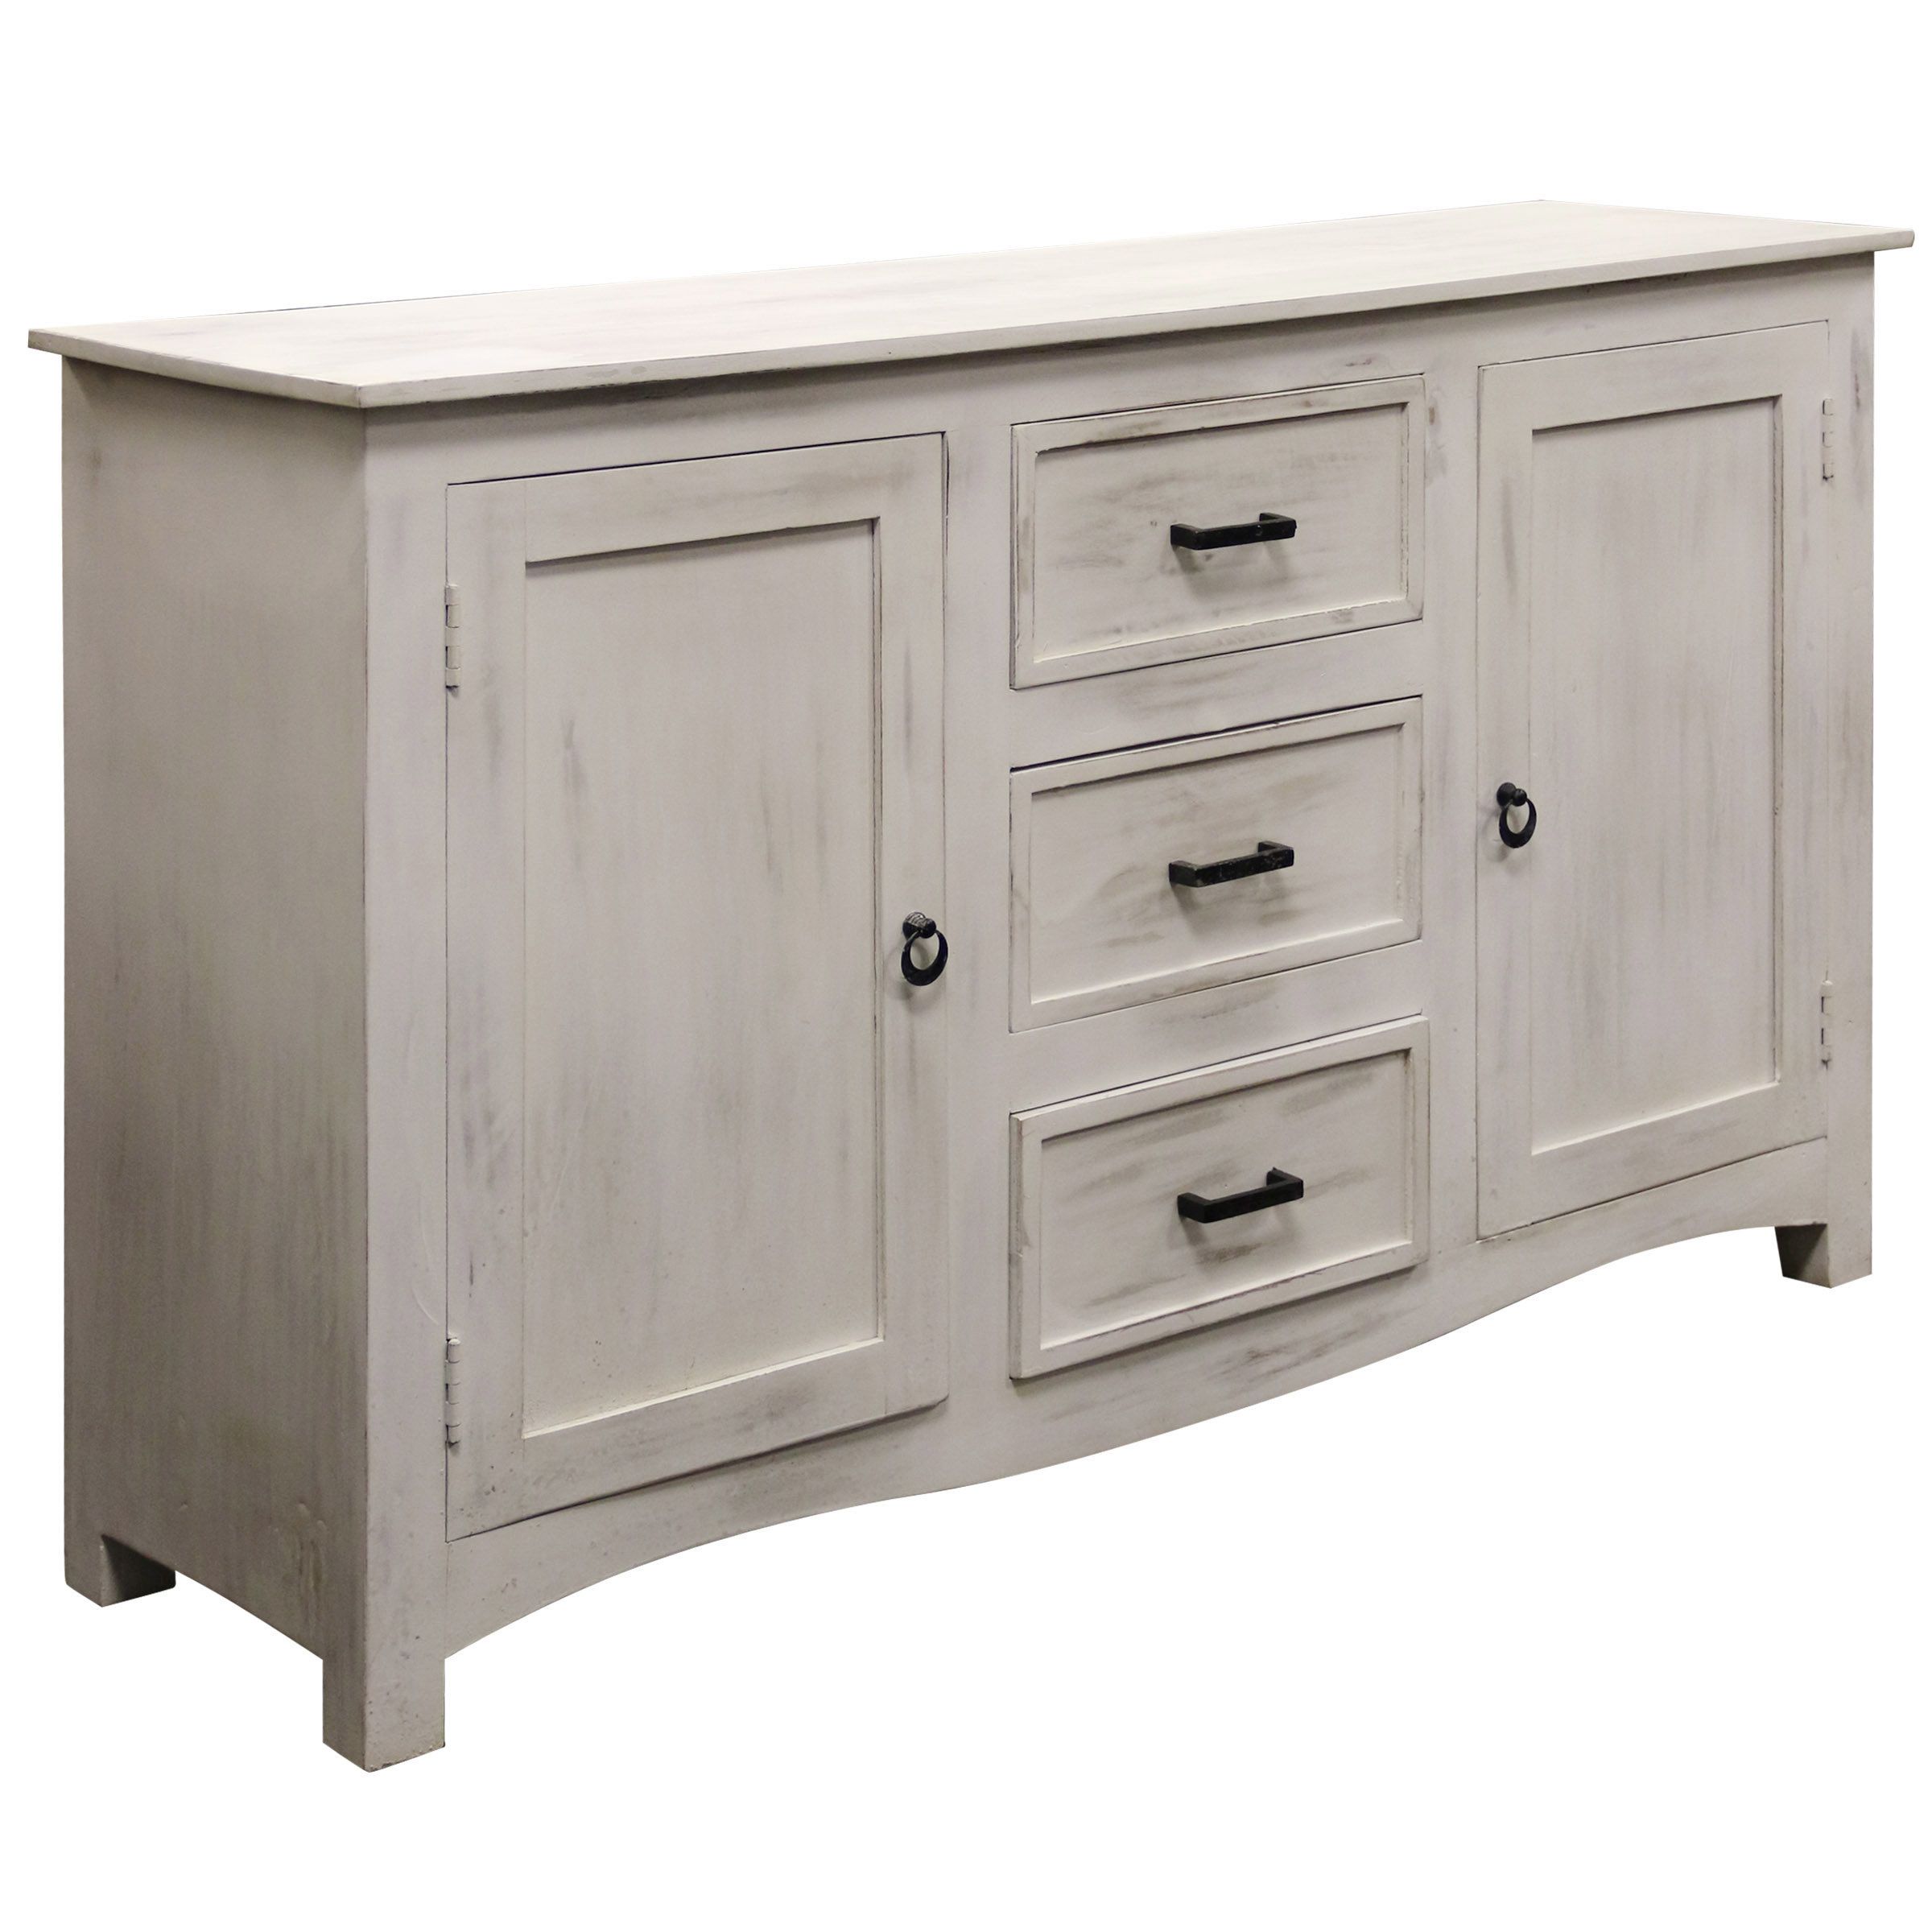 Farmhouse & Rustic August Grove Sideboards & Buffets | Birch For Etienne Sideboards (View 16 of 20)